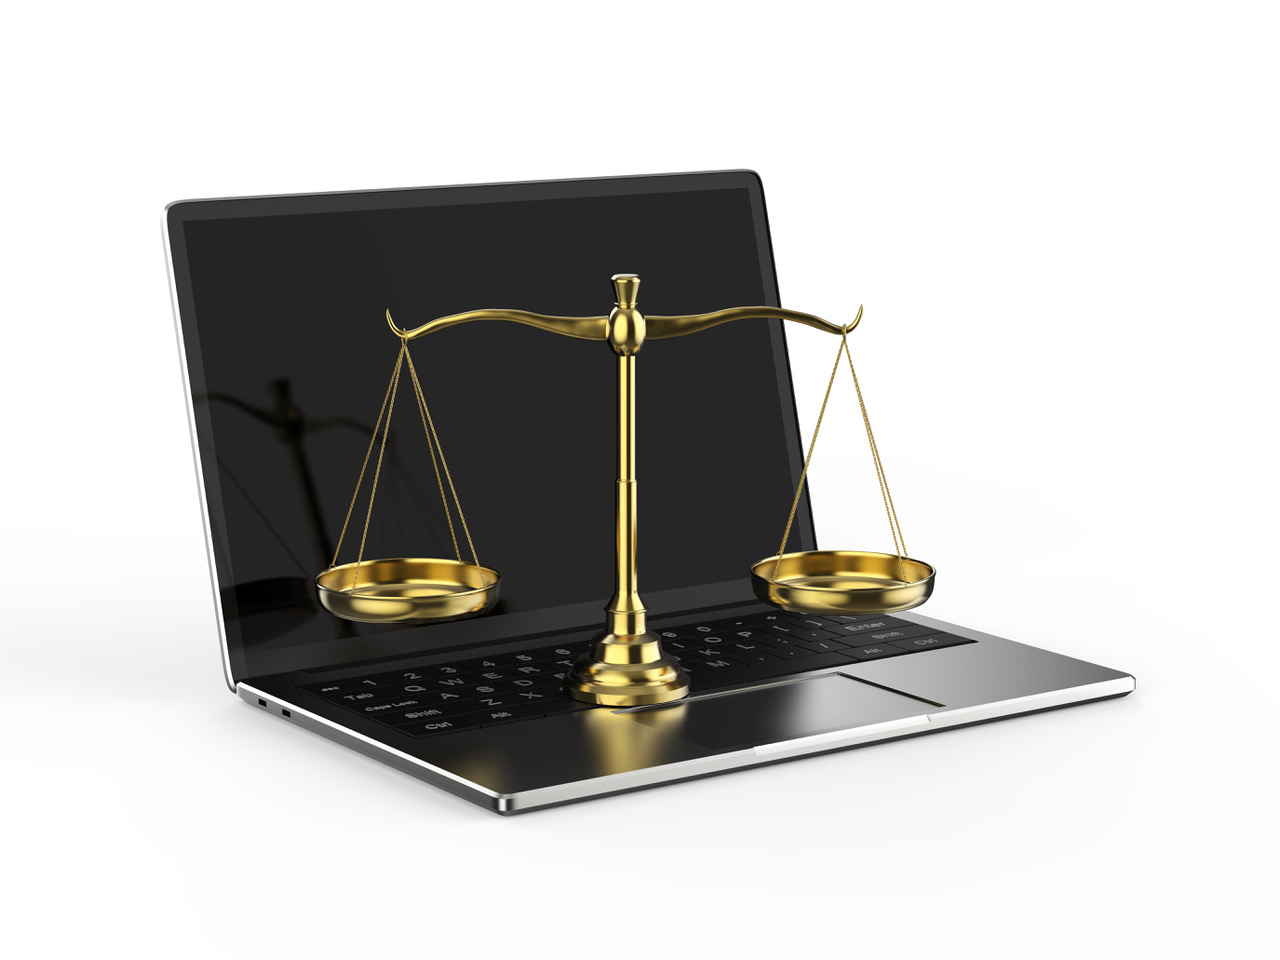 Cyber law or internet law concept